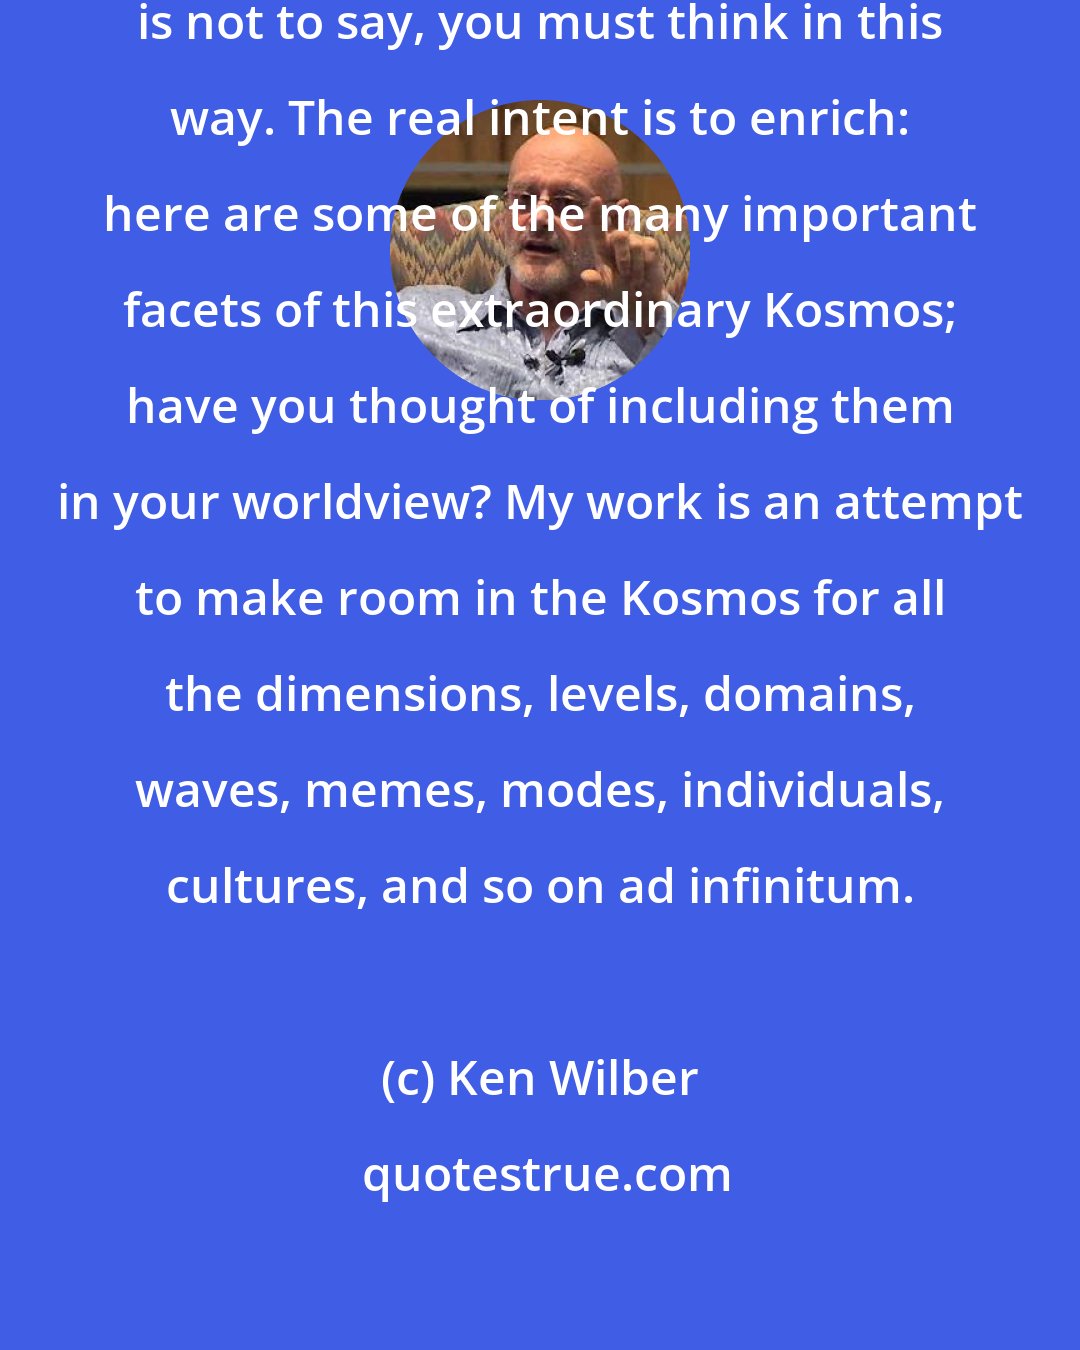 Ken Wilber: But the real intent of my writing is not to say, you must think in this way. The real intent is to enrich: here are some of the many important facets of this extraordinary Kosmos; have you thought of including them in your worldview? My work is an attempt to make room in the Kosmos for all the dimensions, levels, domains, waves, memes, modes, individuals, cultures, and so on ad infinitum.